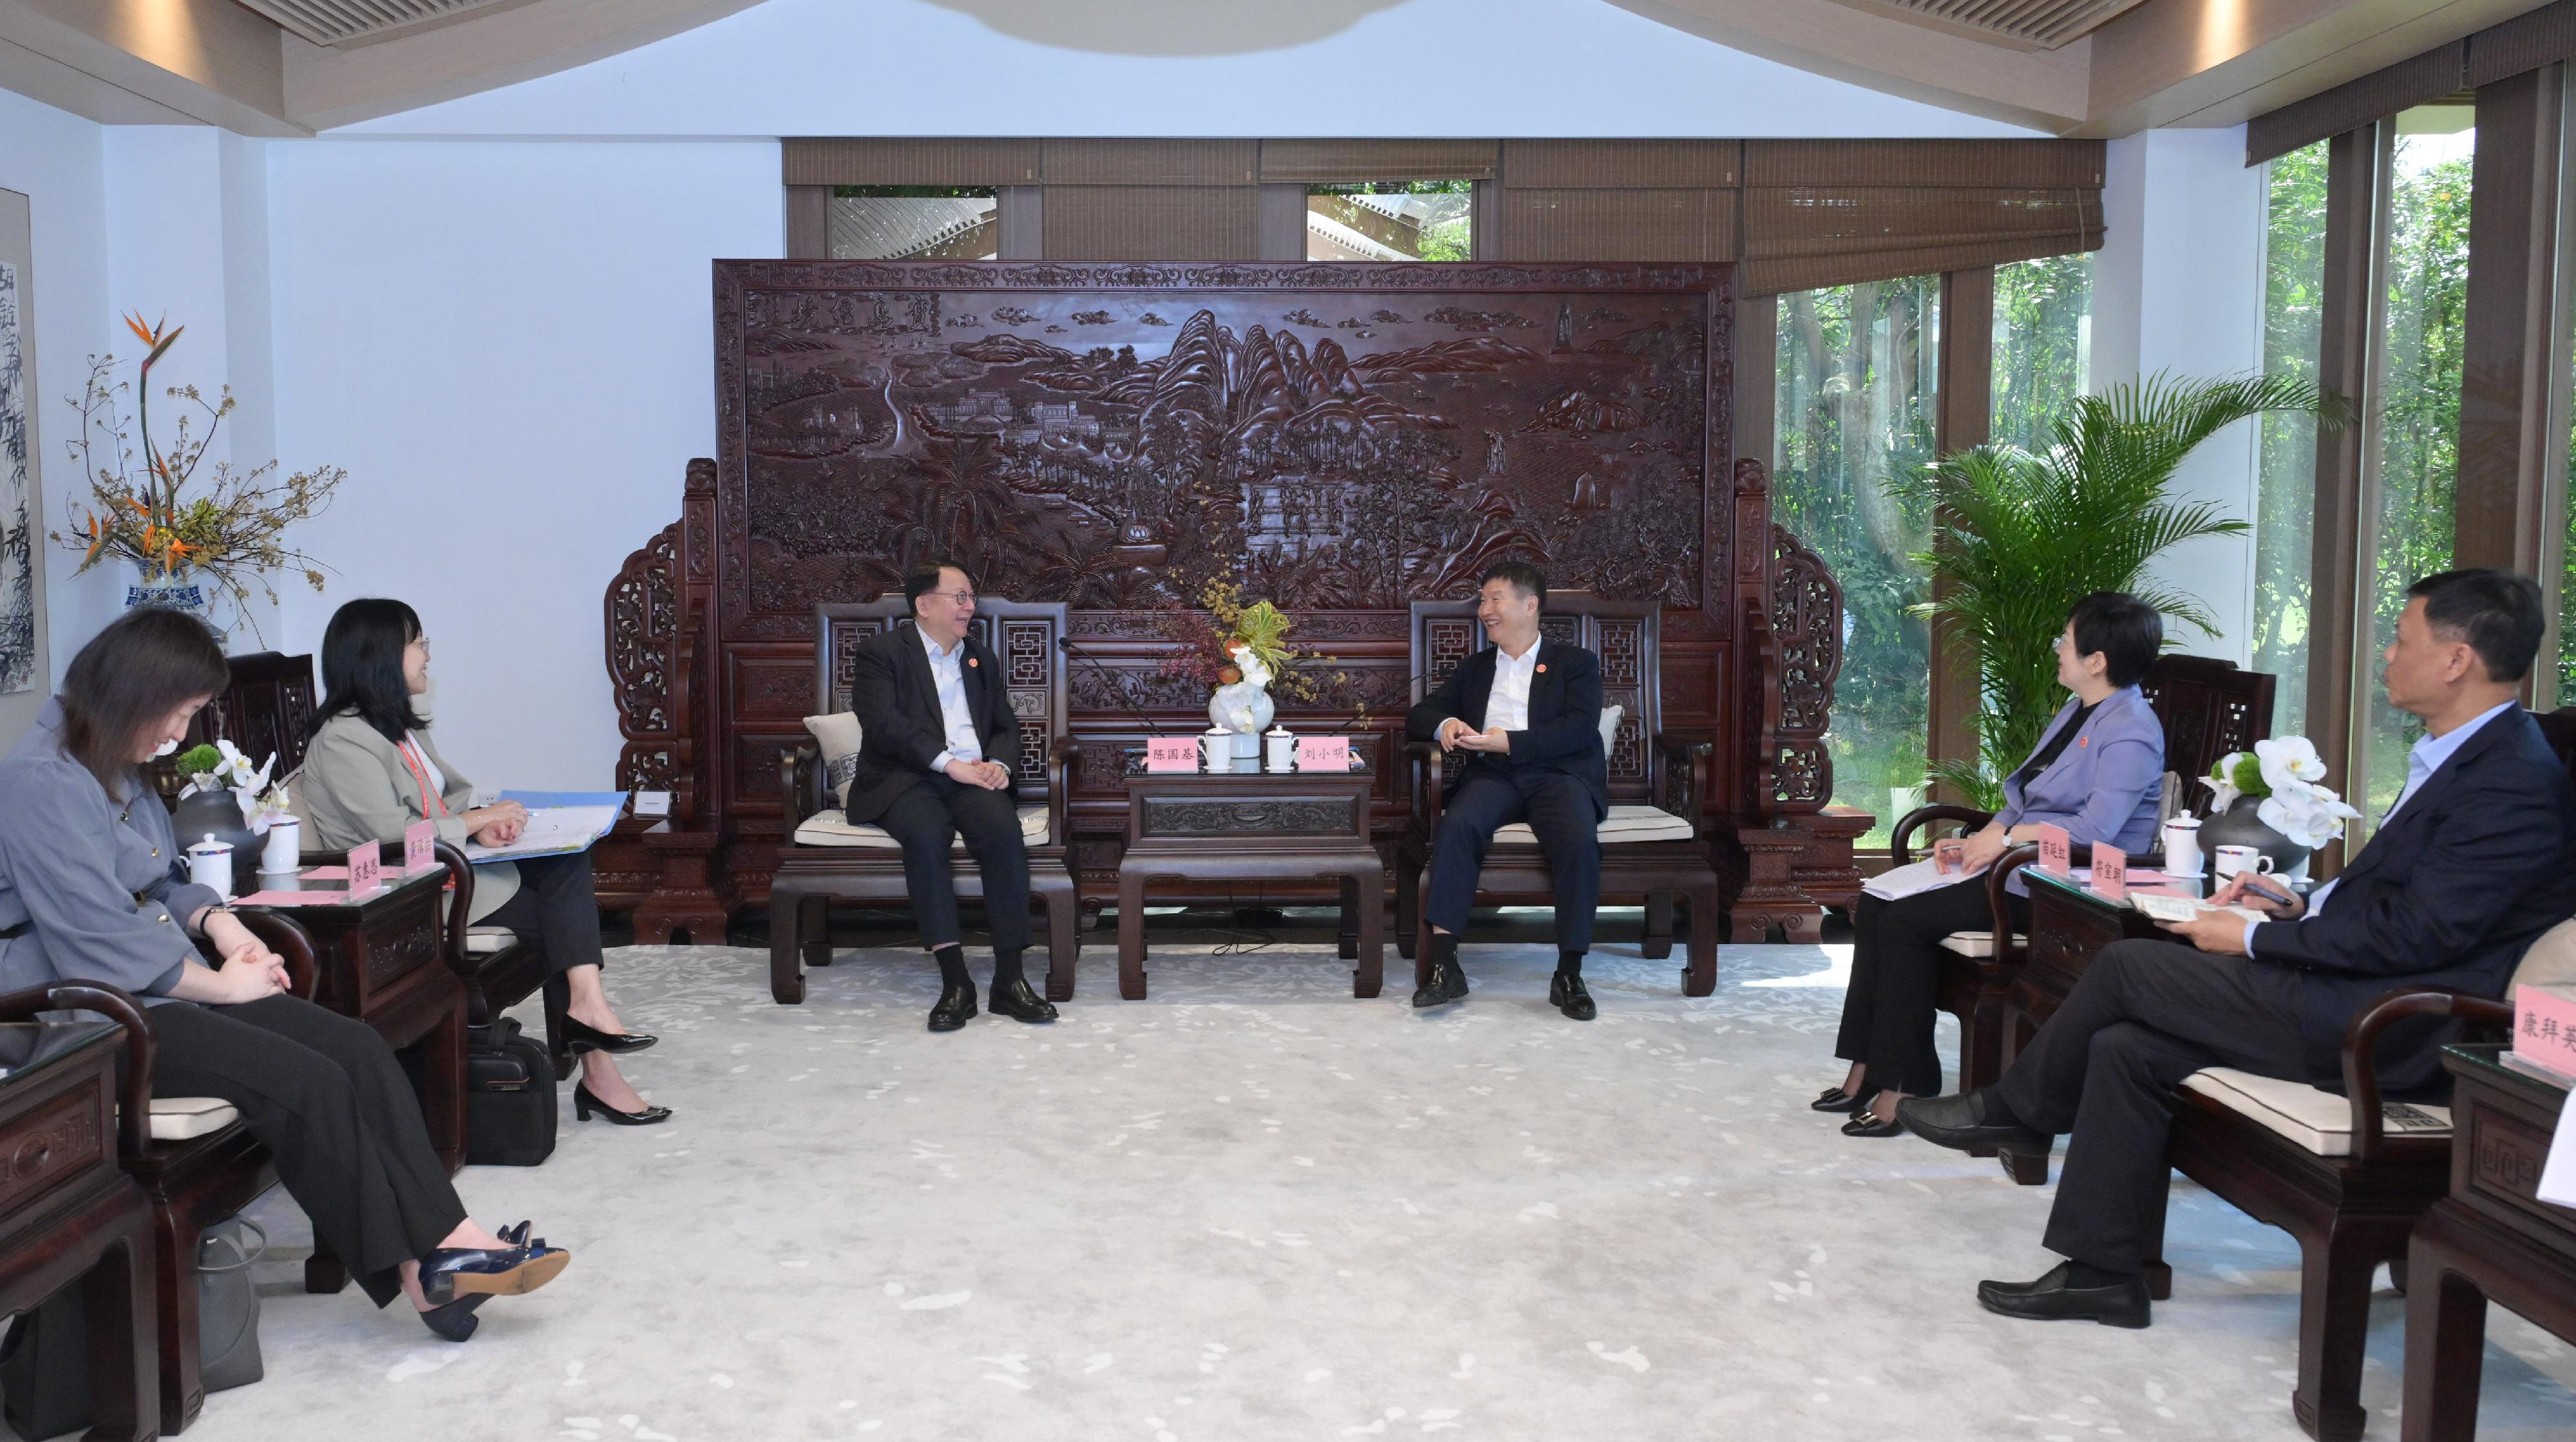 The Chief Secretary for Administration, Mr Chan Kwok-ki (third left), meets with the Governor of Hainan Province, Mr Liu Xiaoming (third right) and the Standing Committee Member of the CPC Hainan Provincial Committee and Head of the United Front Work Department of the Hainan Committee of the CPC, Ms Miao Yanhong (second right) in Hainan today (March 27). The Head (Policy Coordination) of the Chief Secretary for Administration's Private Office, Ms Kinnie Wong (second left) also attended.